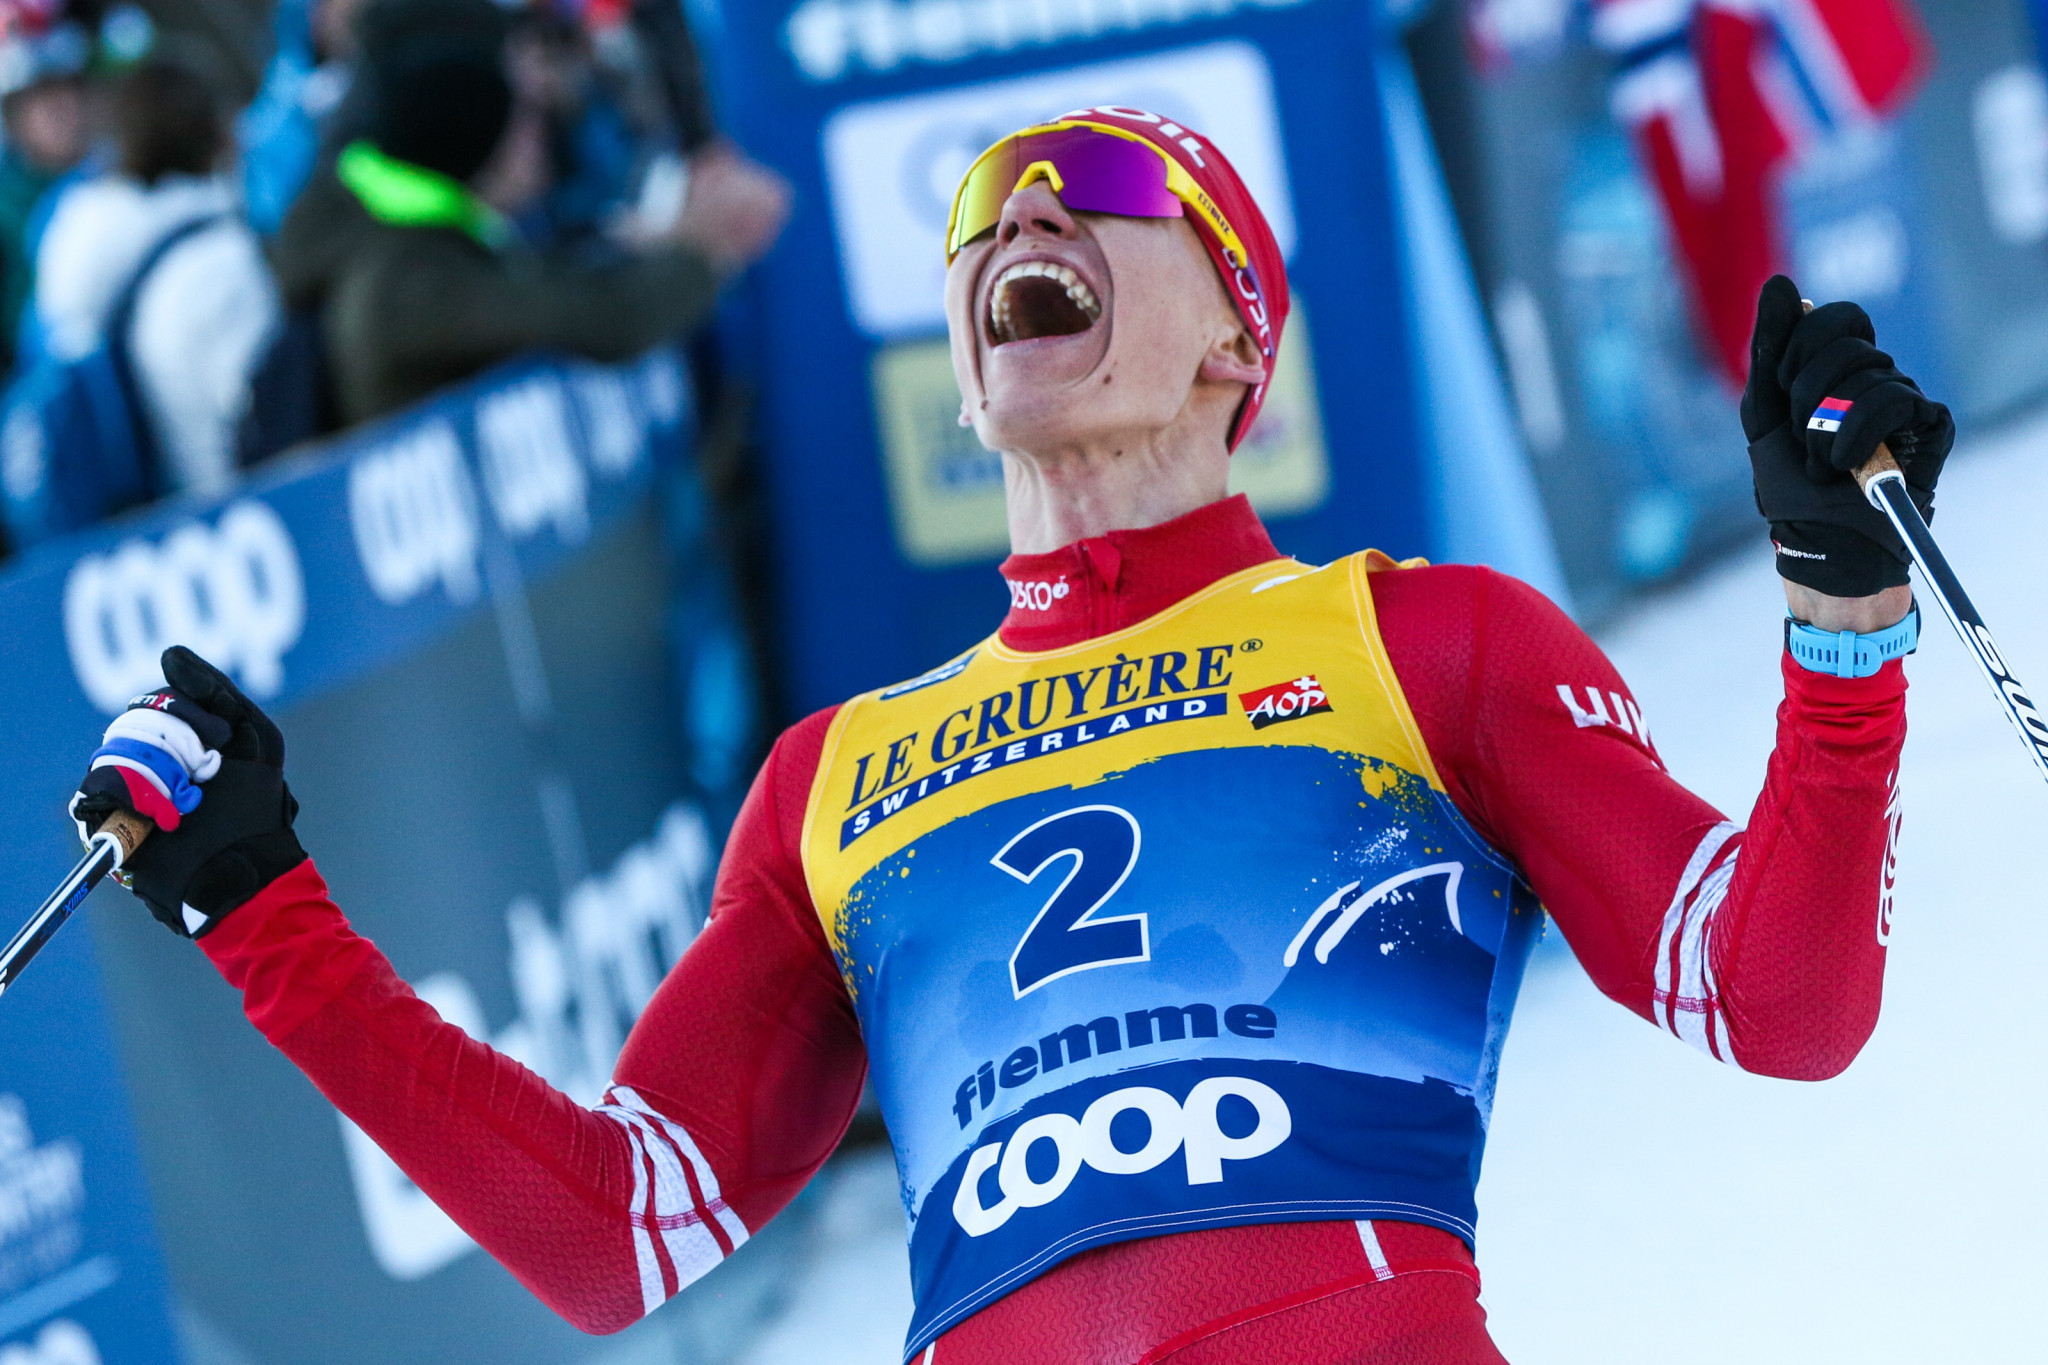 Bolshunov and Johaug victorious again at FIS Cross-Country World Cup in Nové Město 